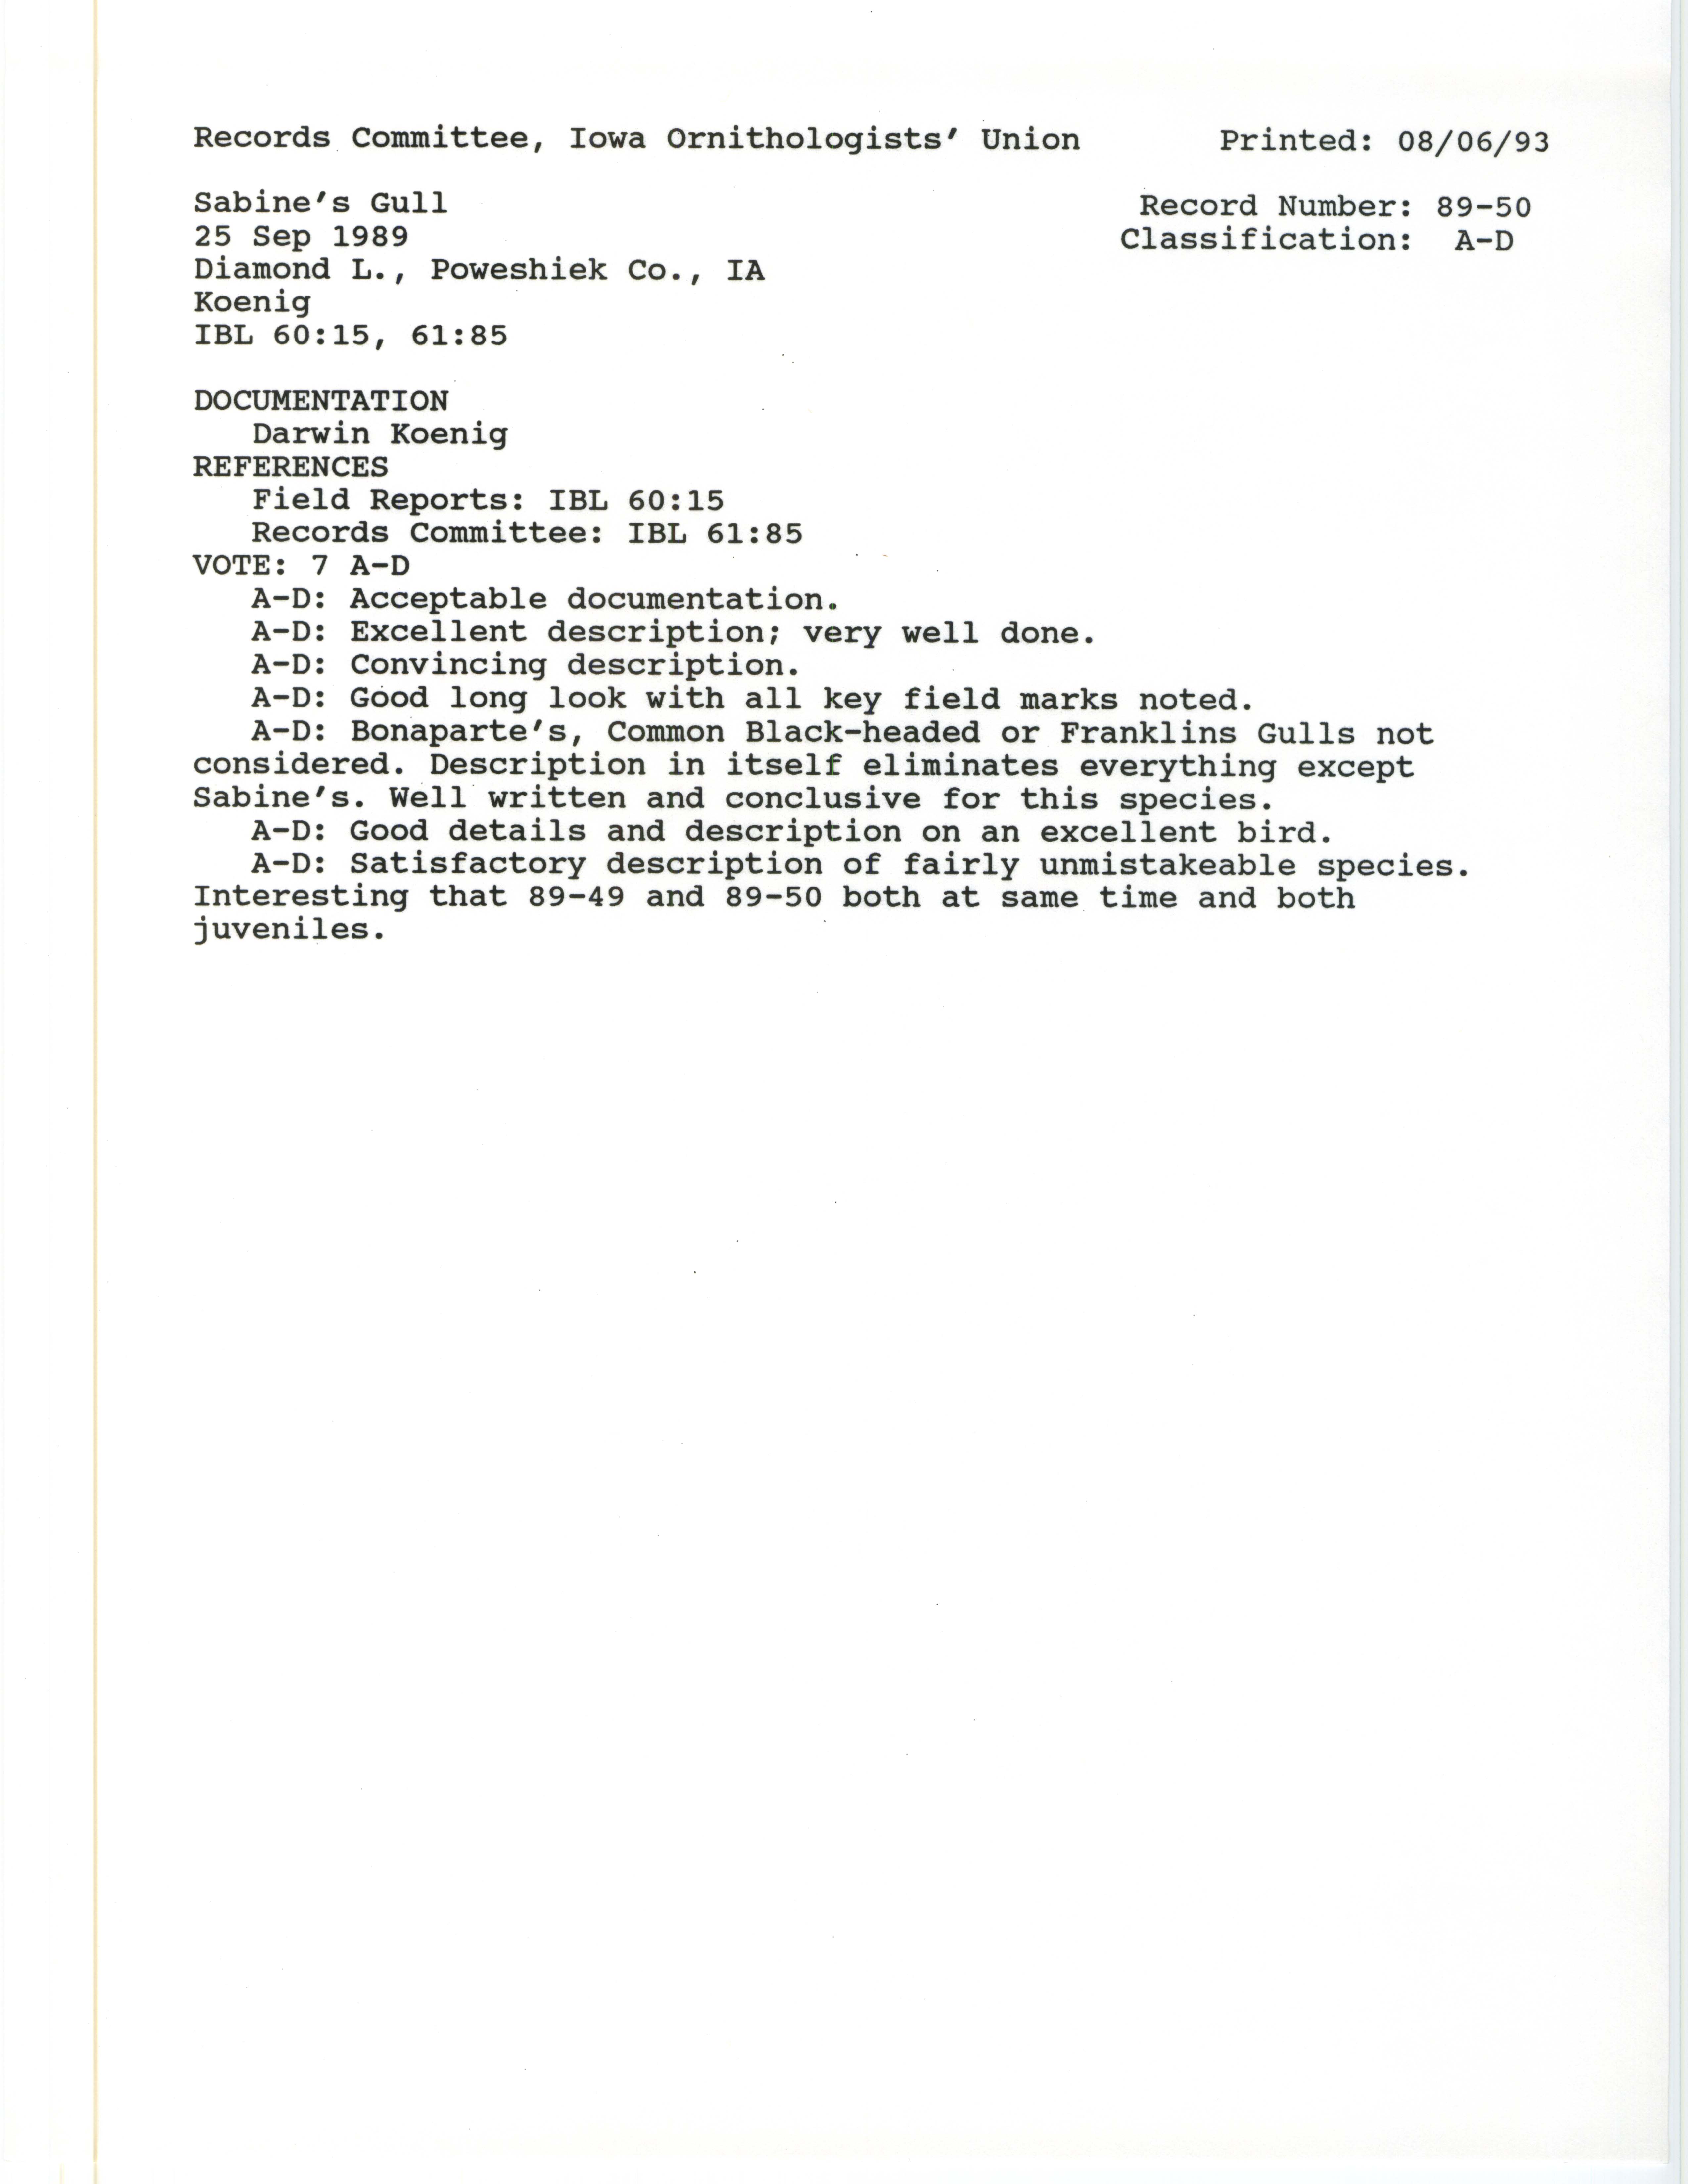 Records Committee review for rare bird sighting of Sabine's Gull at Diamond Lake County Park, 1989